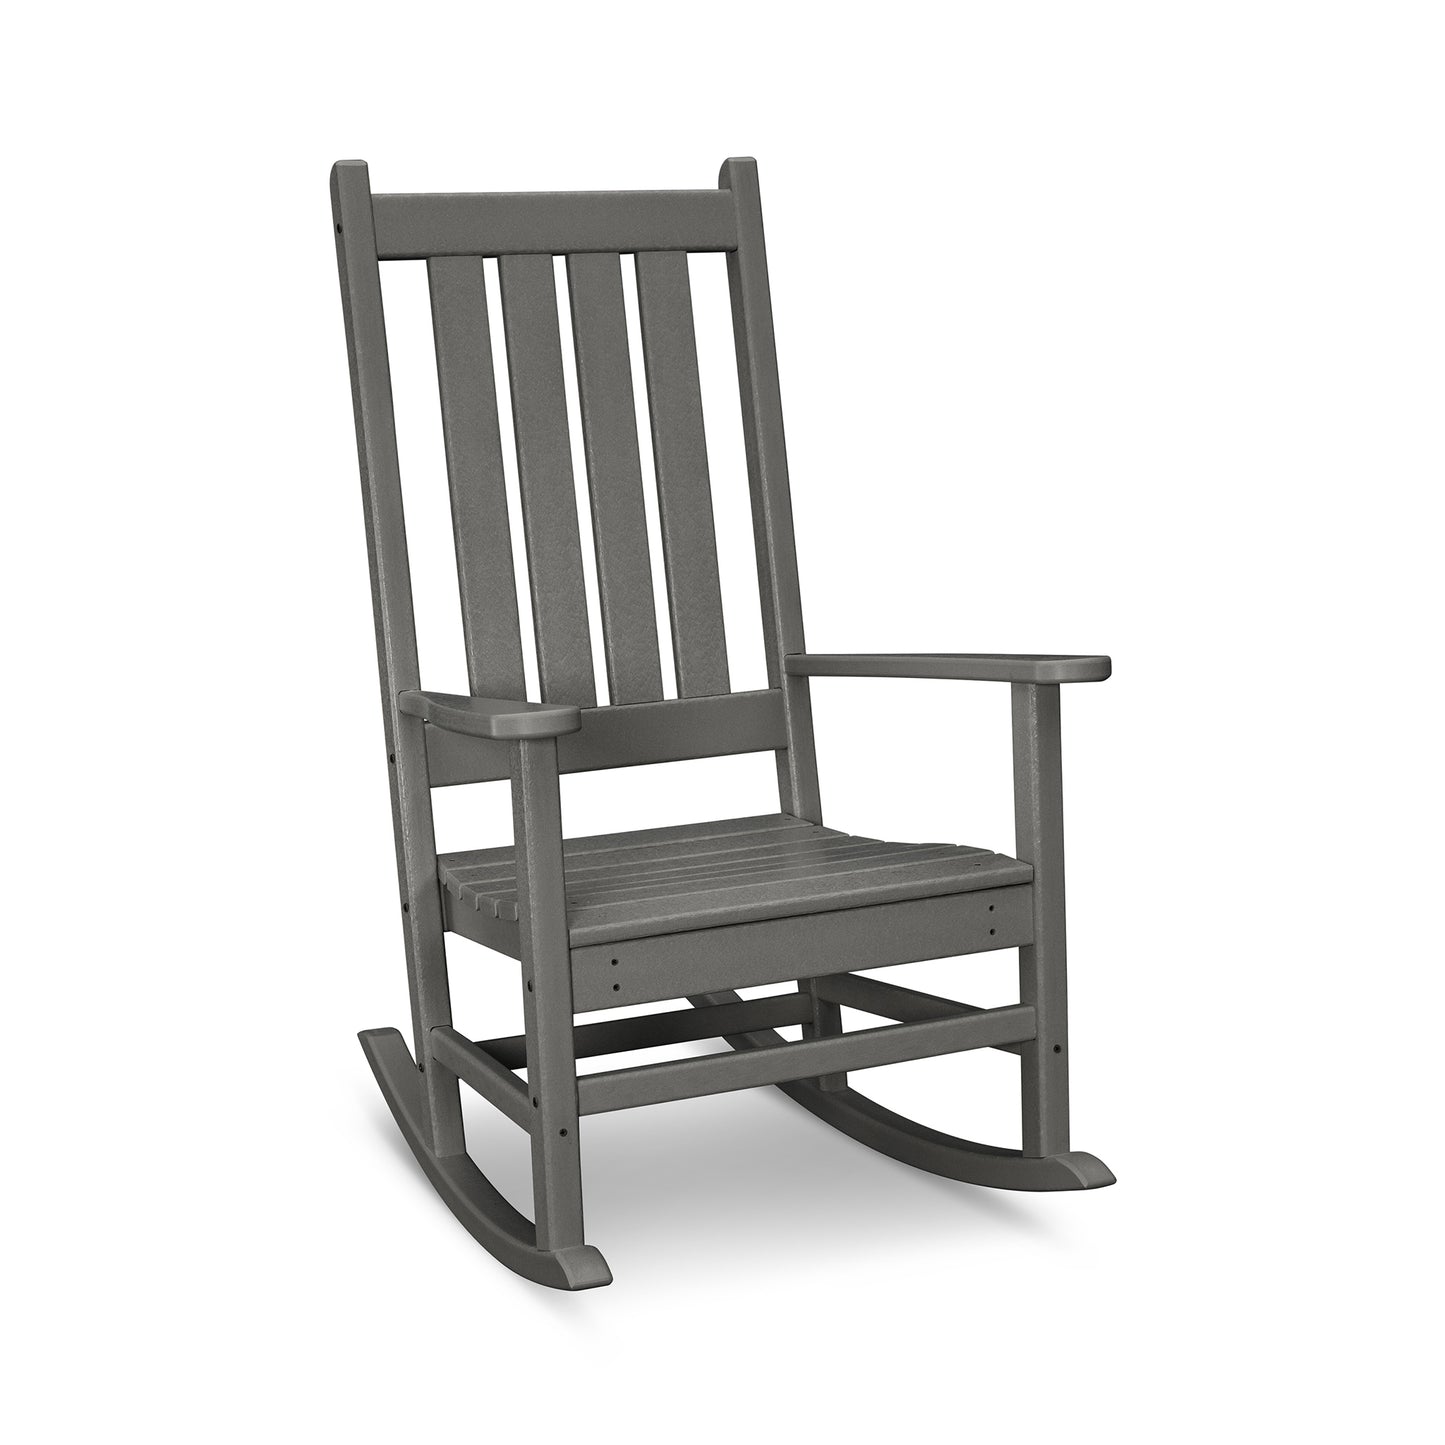 A gray POLYWOOD® Vineyard Porch Rocking Chair with vertical slats on the backrest and seat, featuring armrests and mounted on curved rocking legs, isolated on a white background.